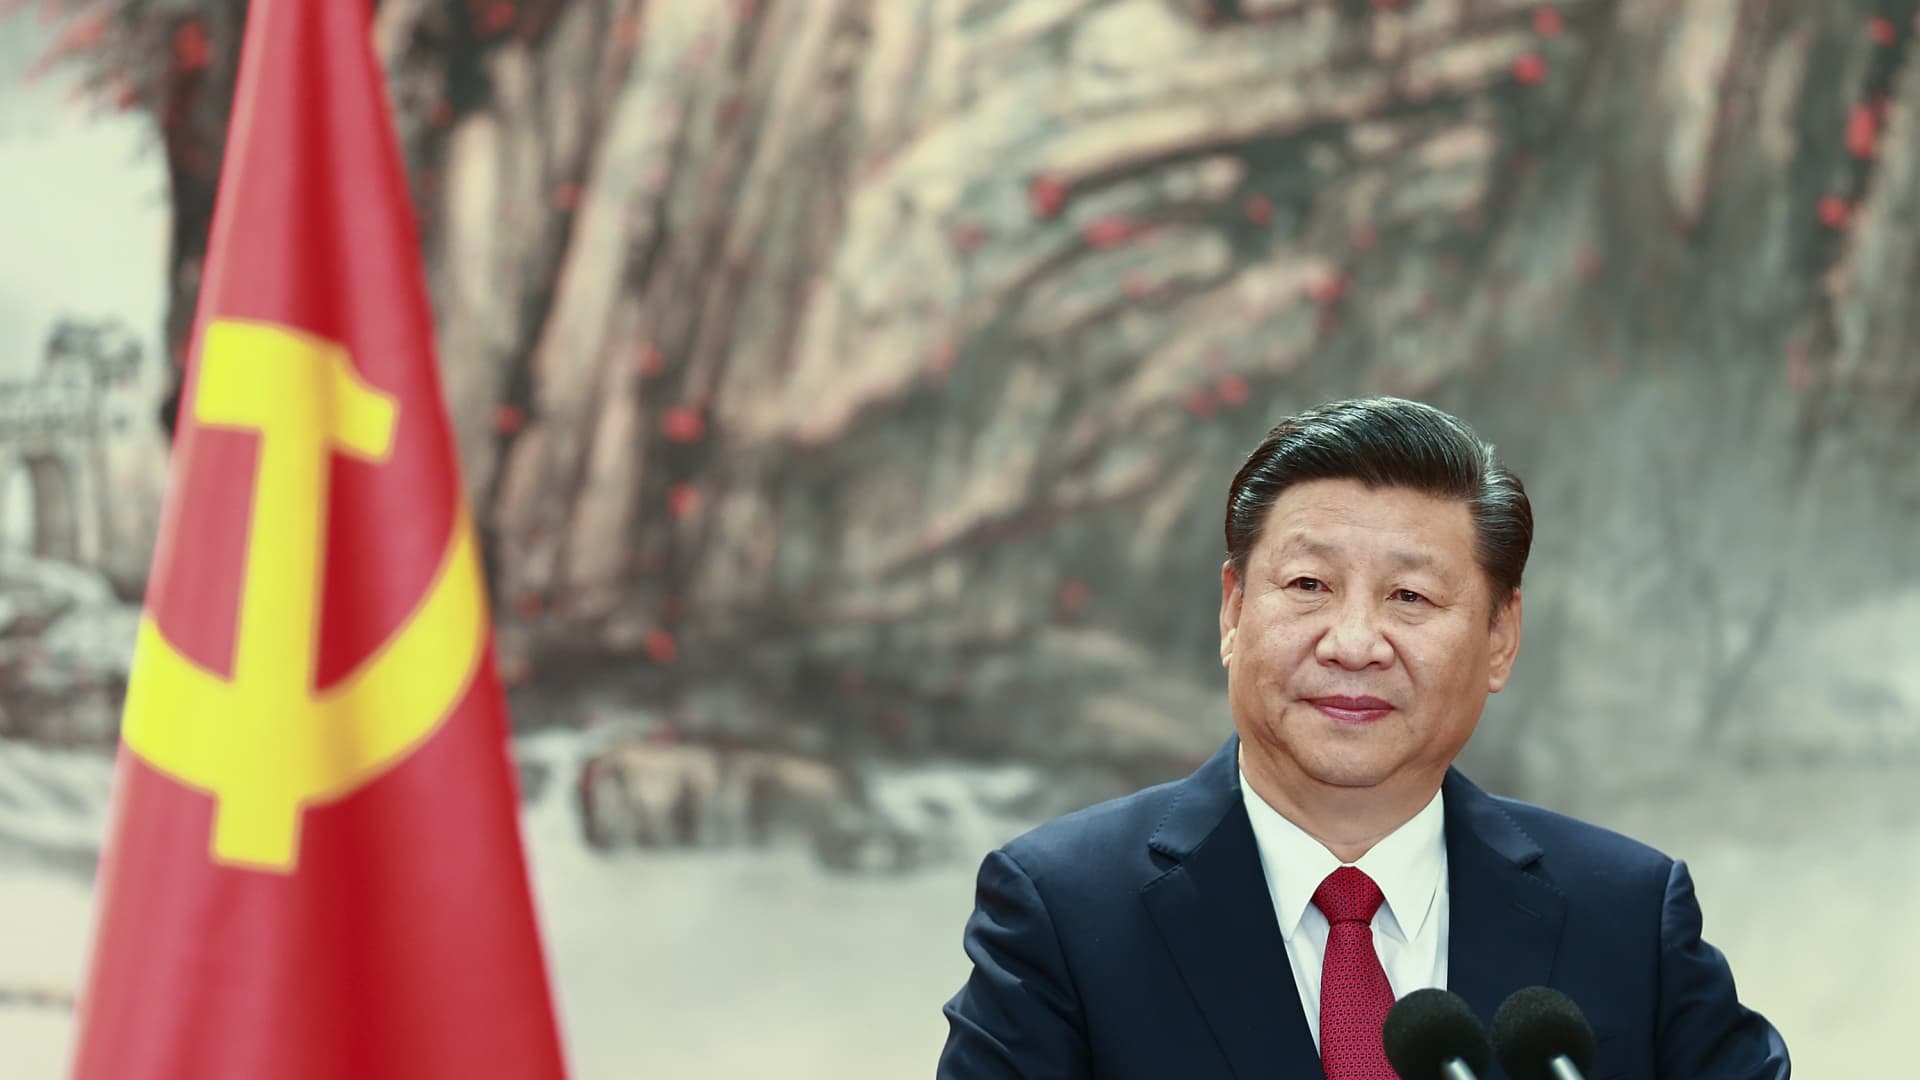 Why China’s Xi Jinping’s damage control is all about heading off a crisis